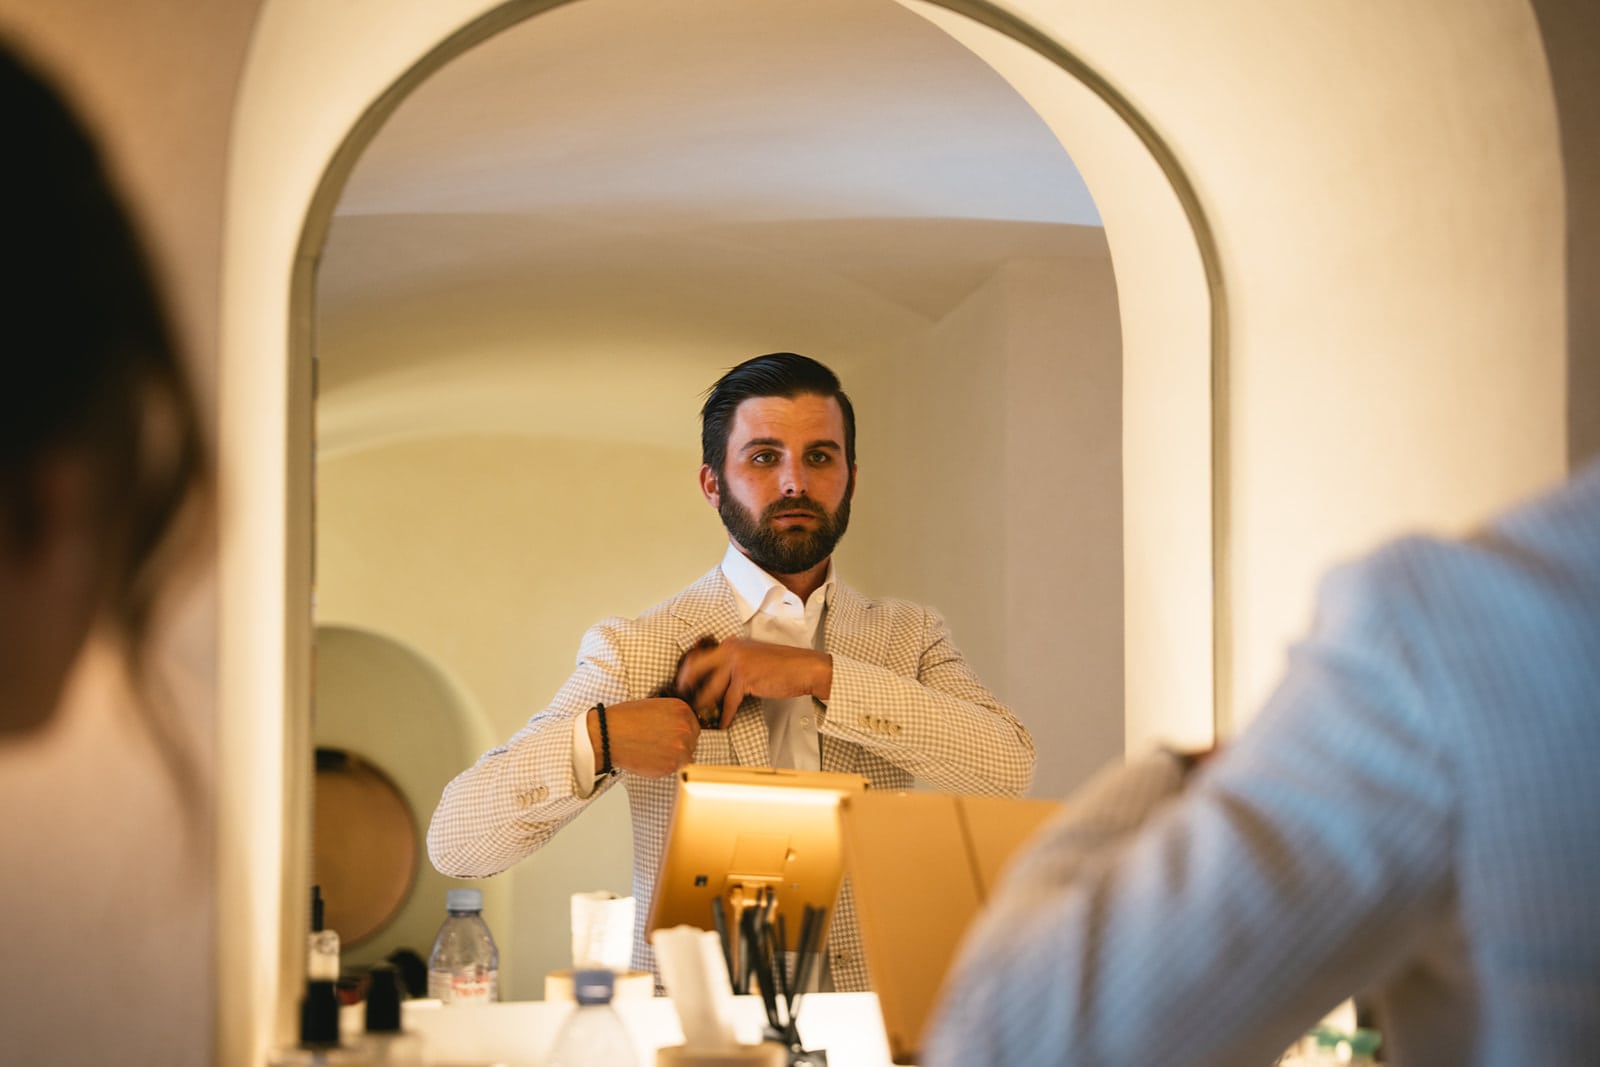 Groom’s reflective moment in the bathroom, preparing heart and soul for the elopement